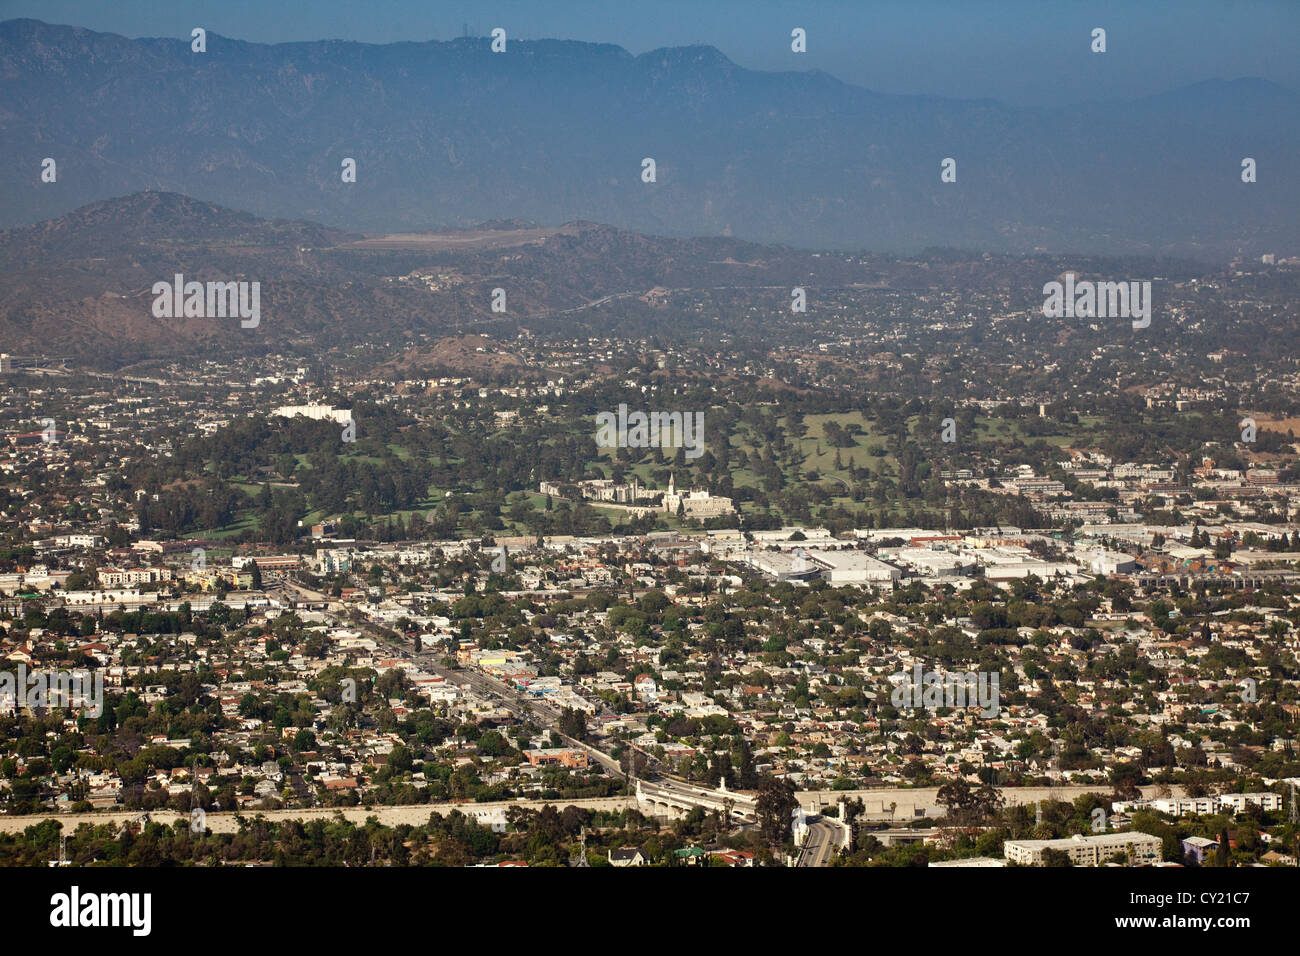 Looking across to Forest Lawn Memorial Park, Glendale. Stock Photo